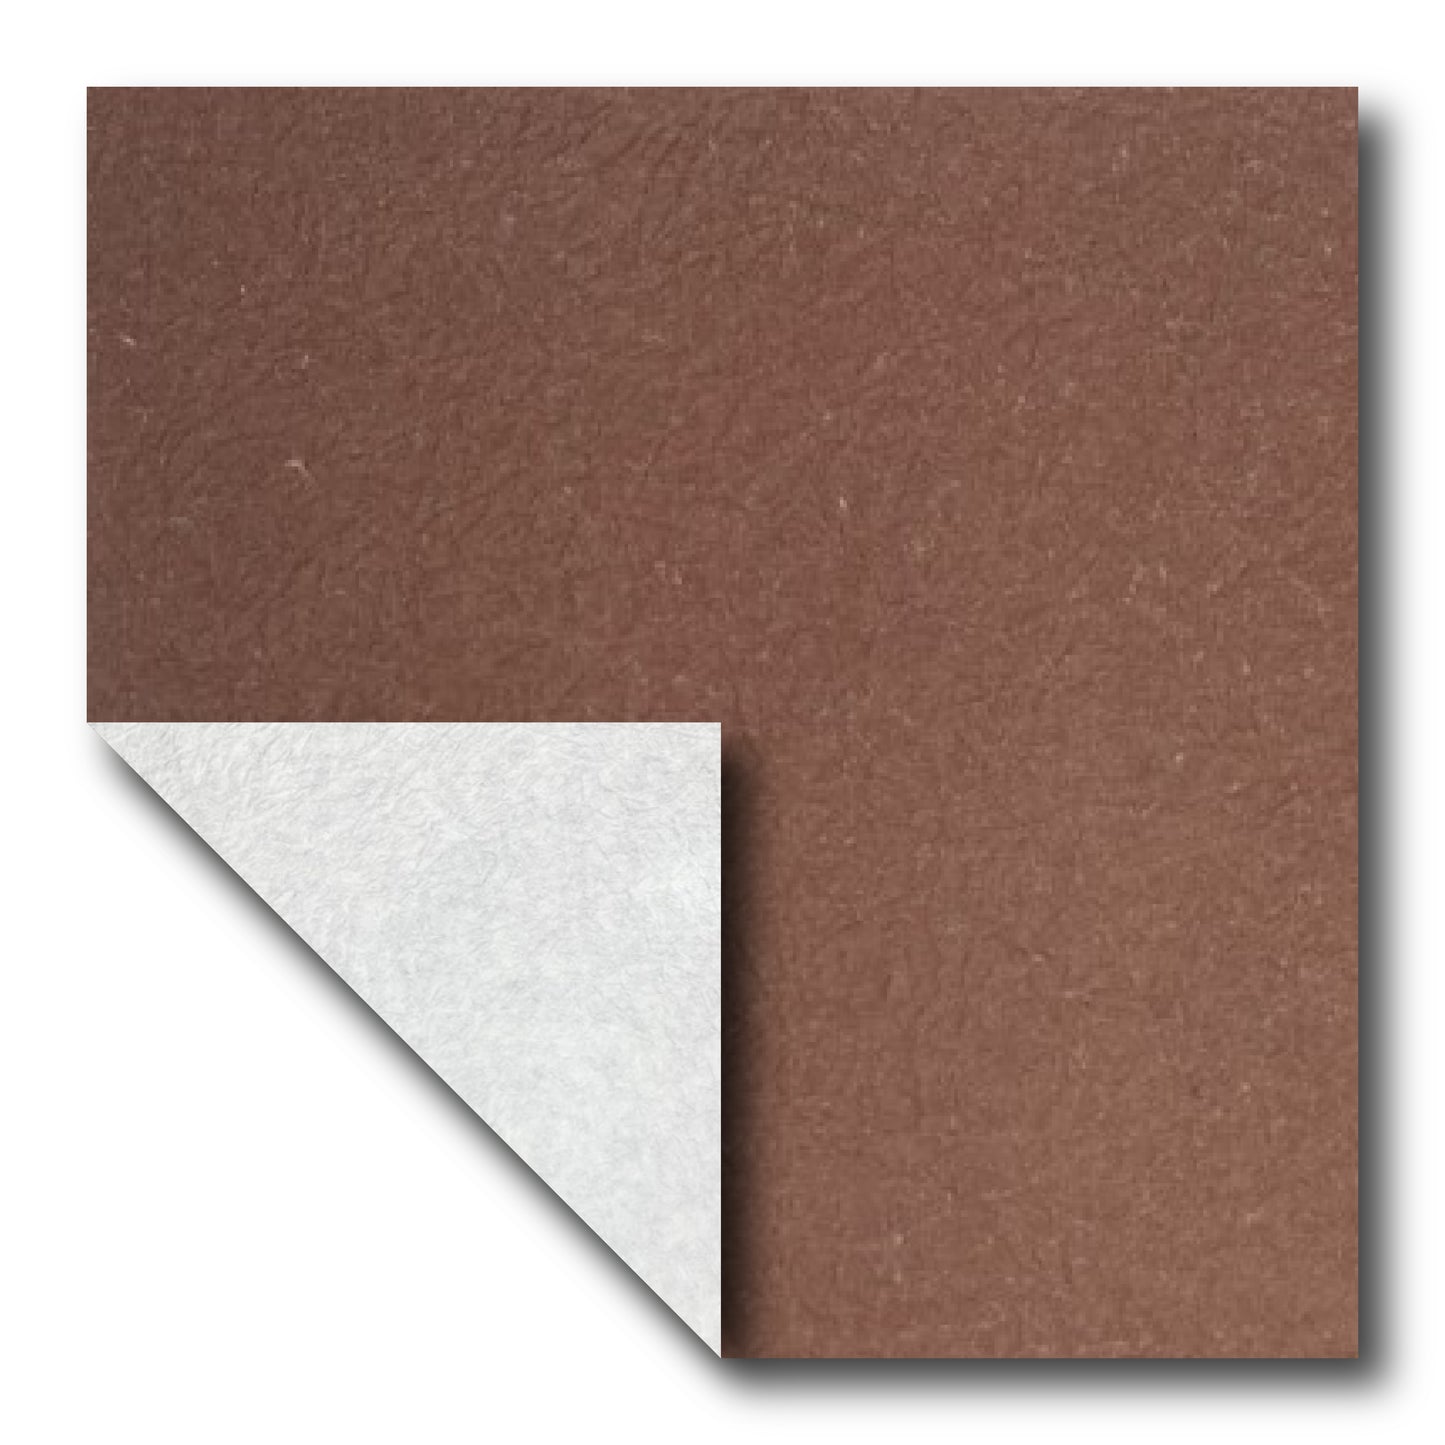 Echizen Momigami (Dual Color: Golden Grey Brown/White)(Sold per sheet) 35cm